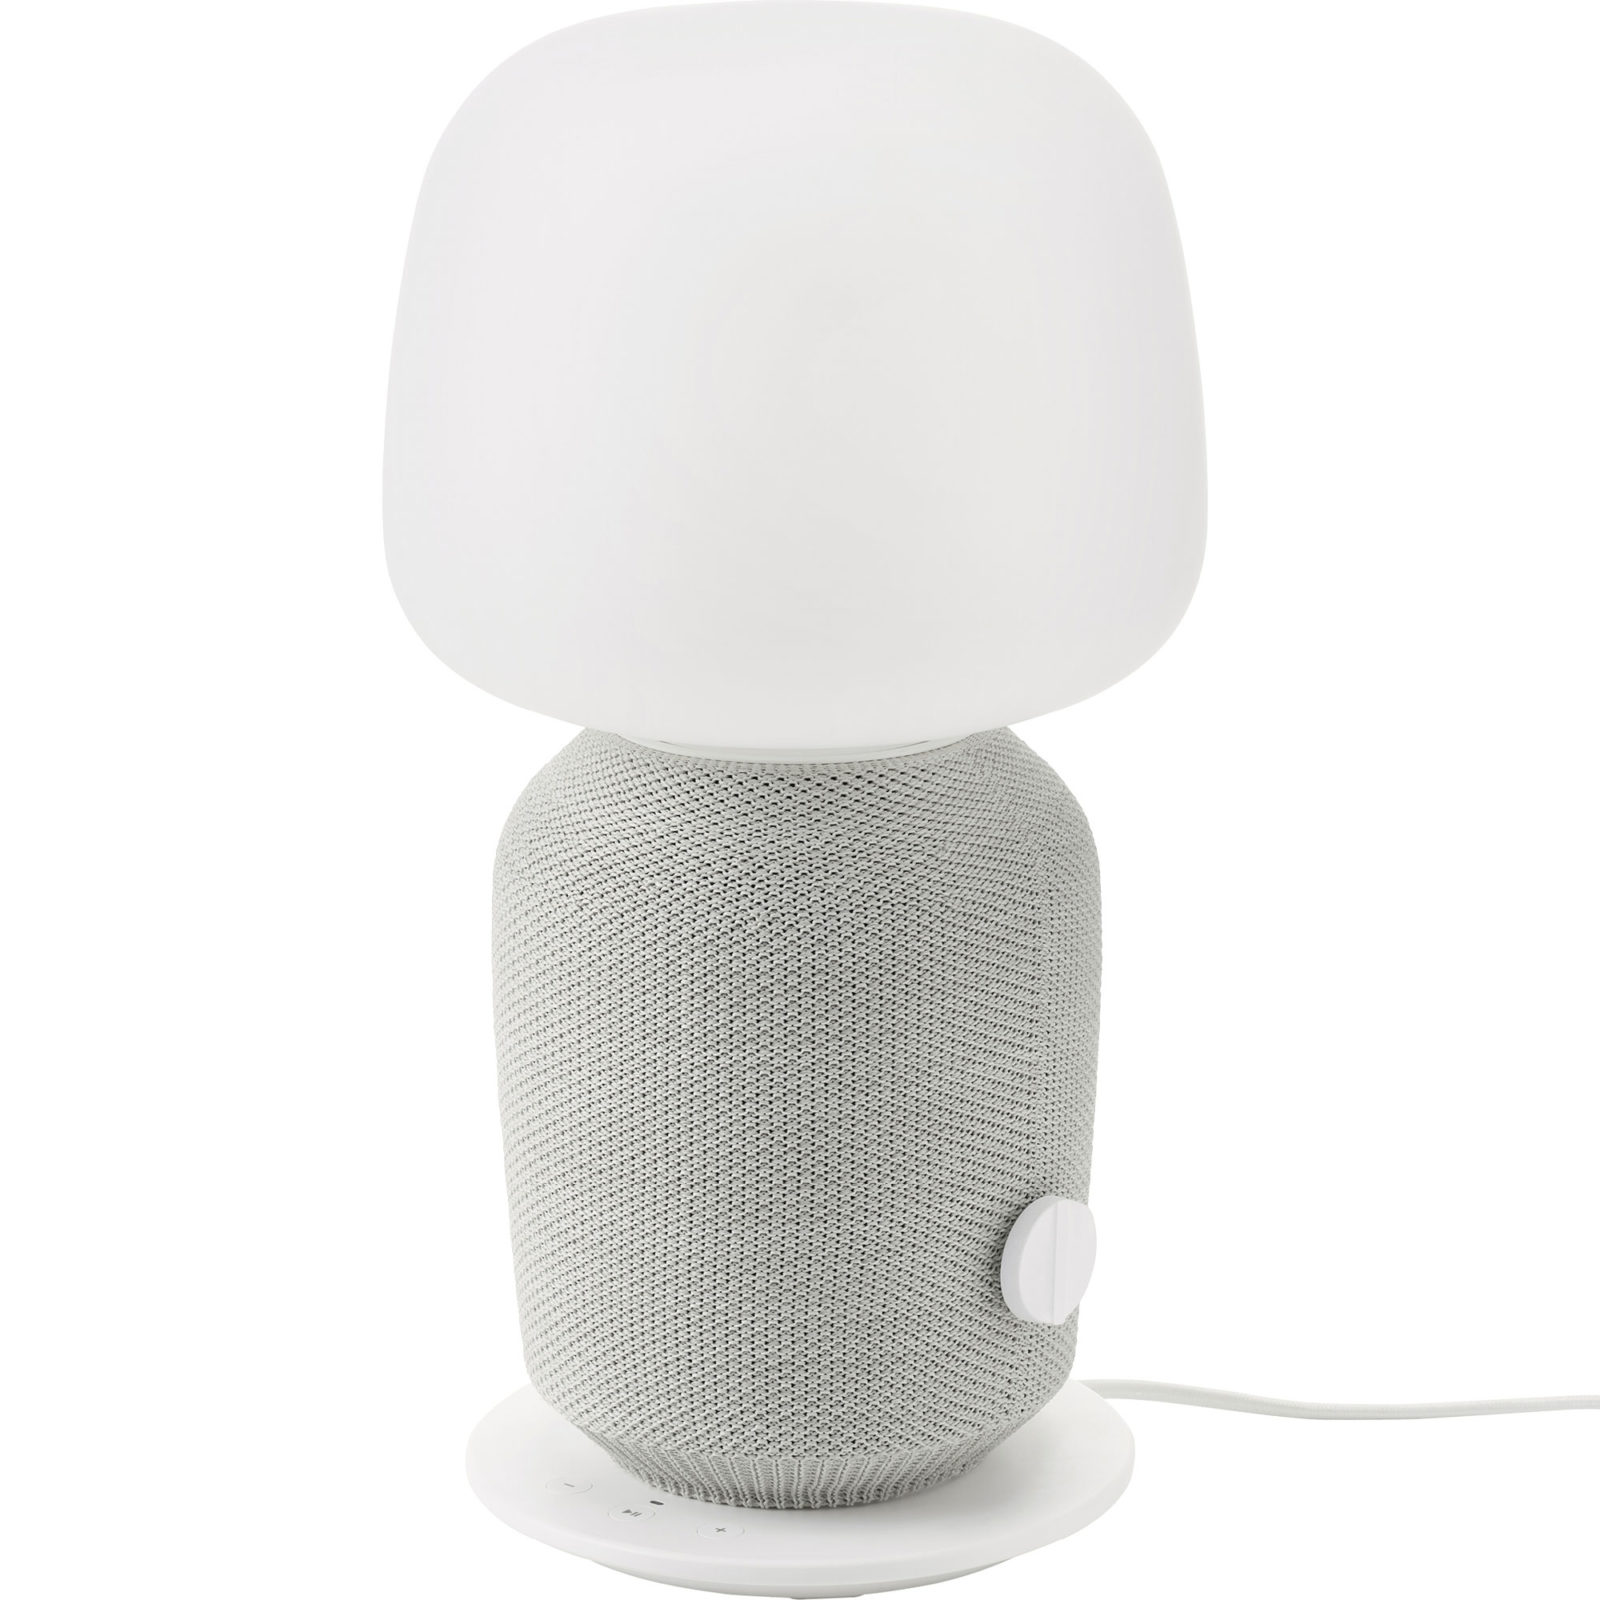 Table lamp with WiFi speaker in the mesh covered grey base, SYMFONISK.